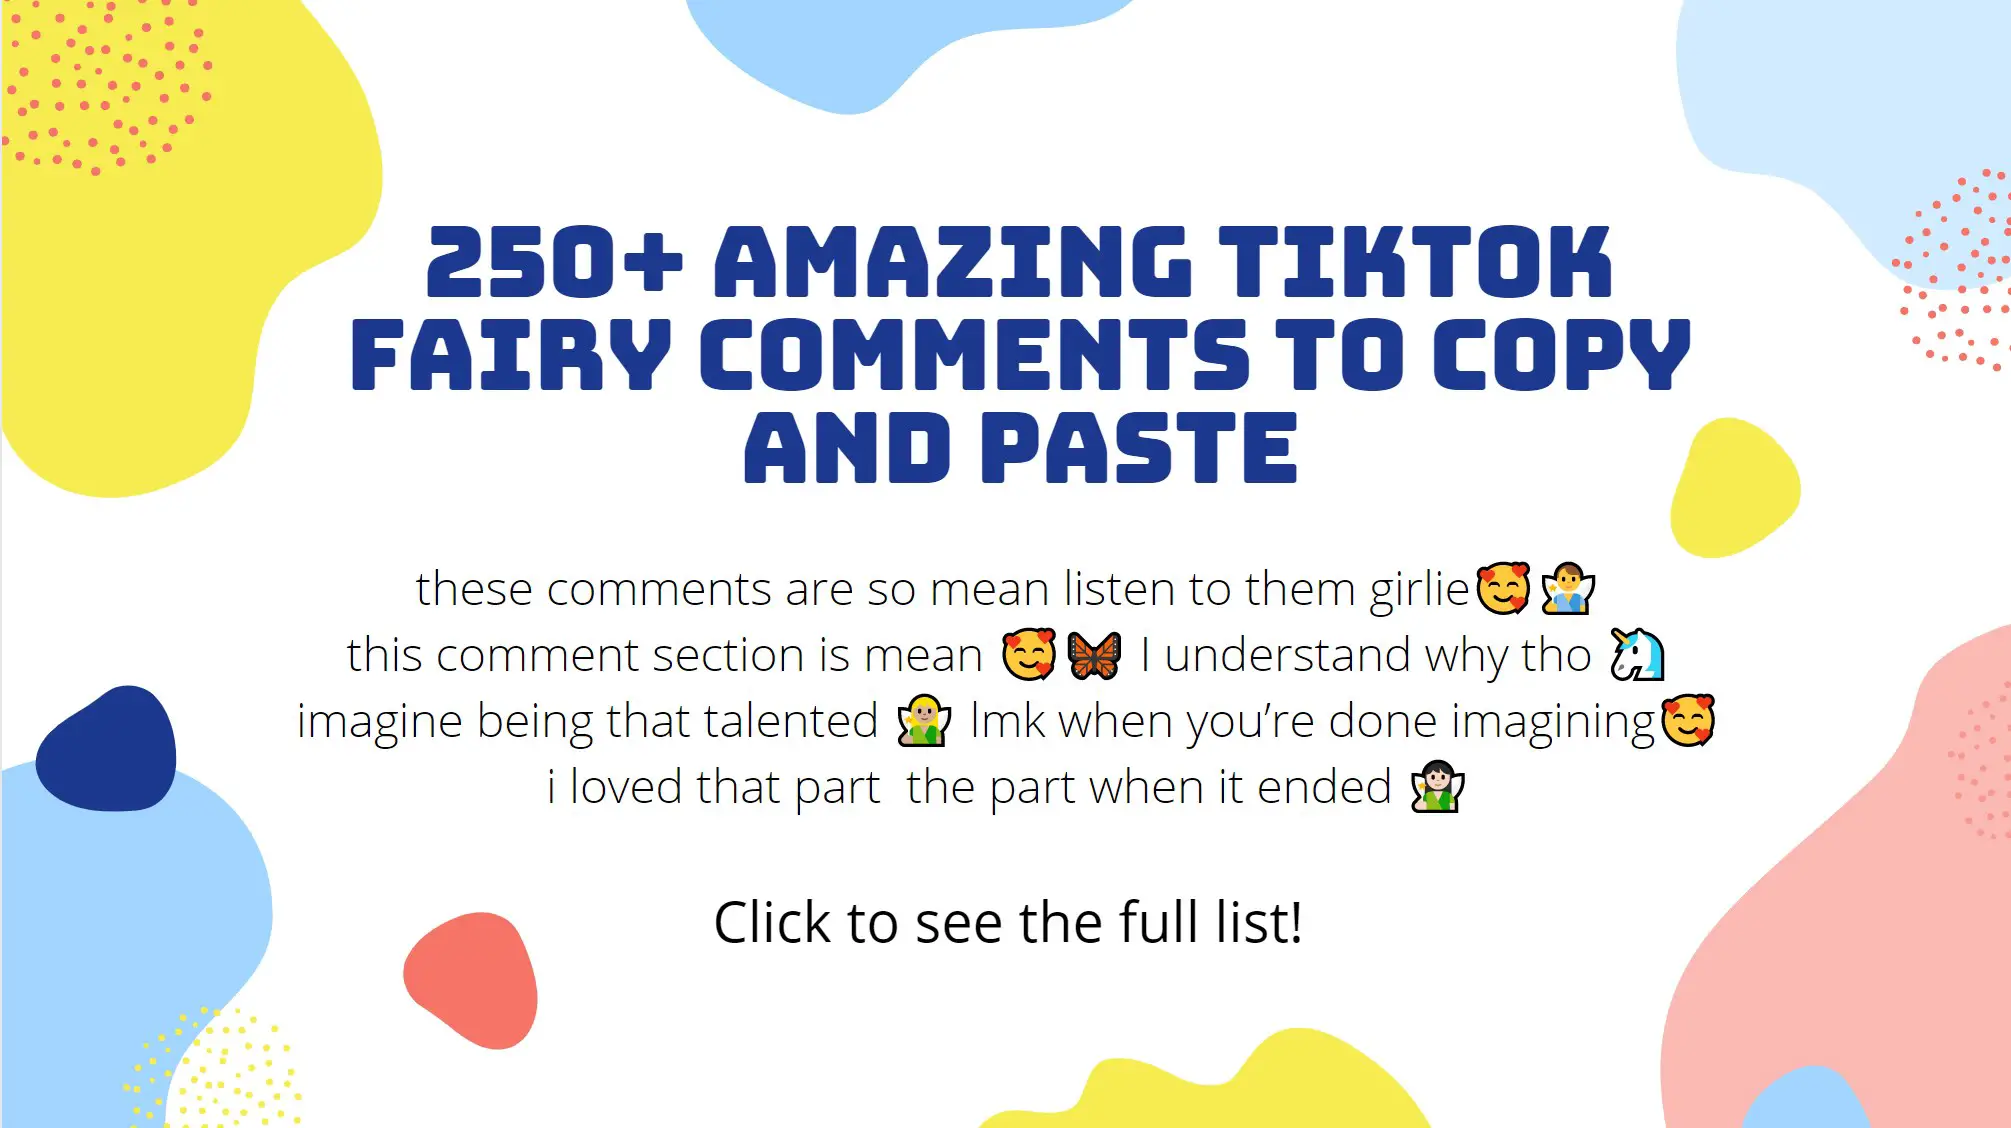 250-amazing-tiktok-fairy-comments-you-can-use-to-copy-and-paste